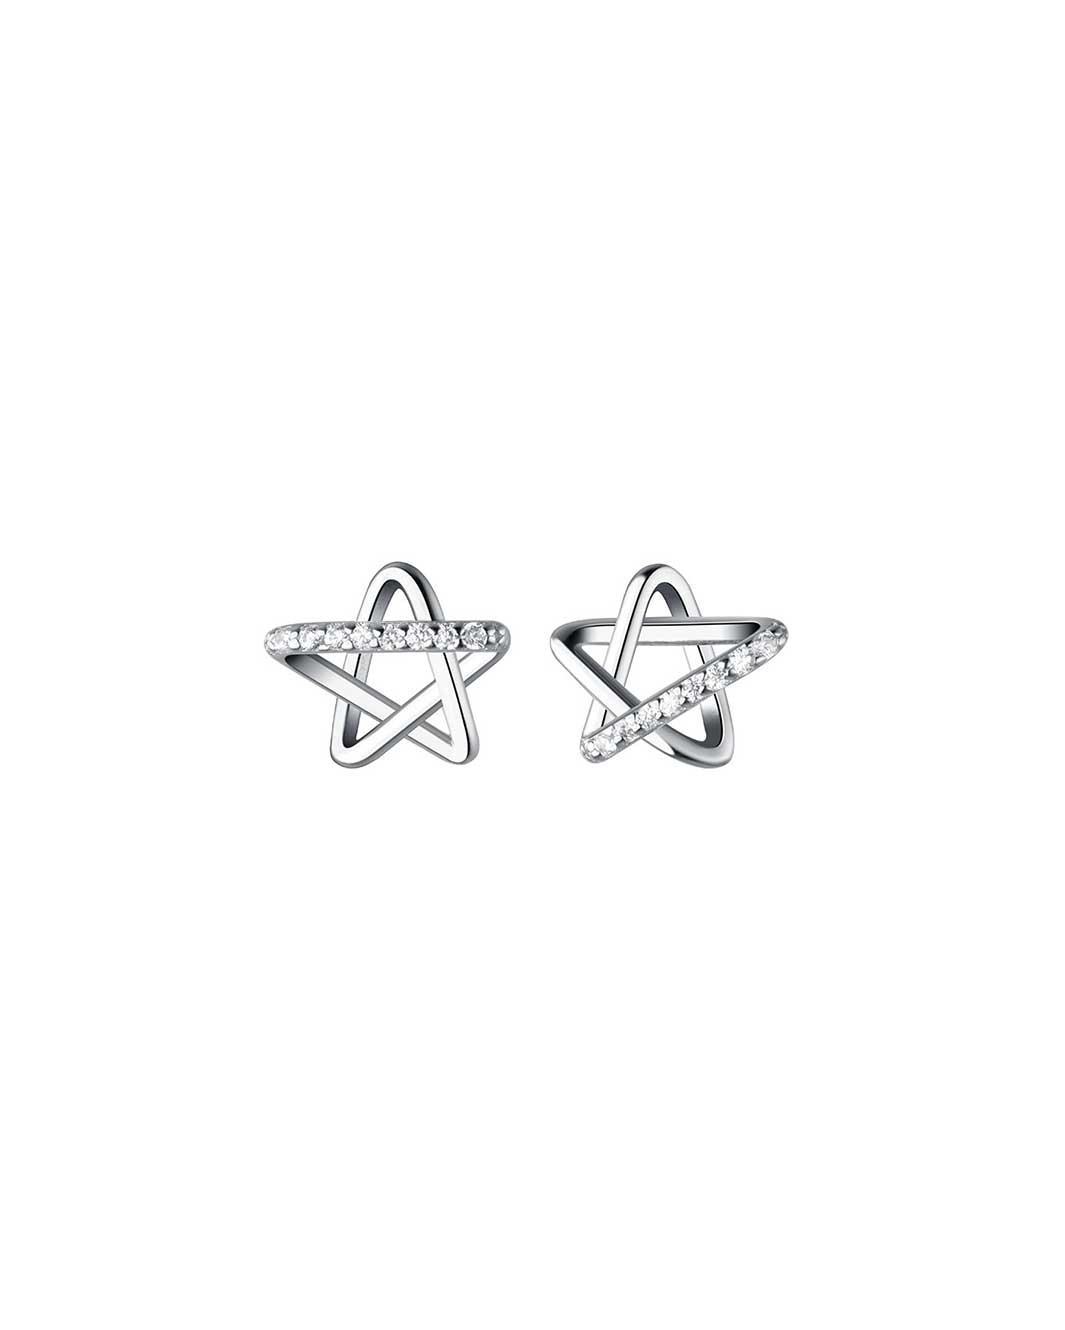 Five-pointed Hollow Star Stud Earrings